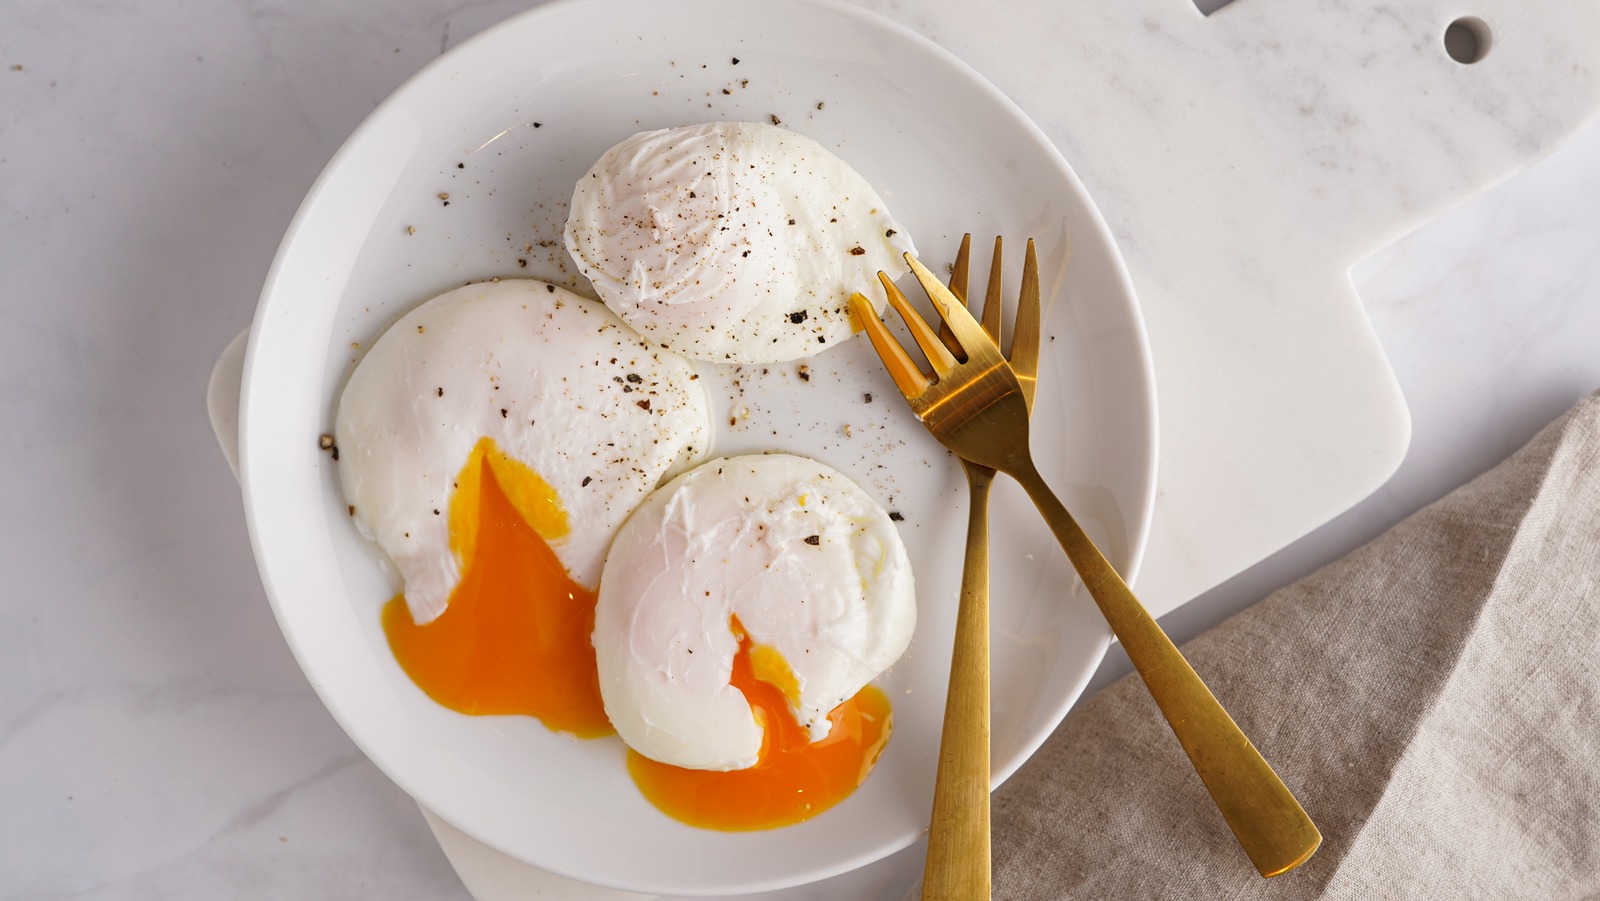 The Foolproof Cling Film Method For Perfect Poached Eggs Every Time – The Daily Meal